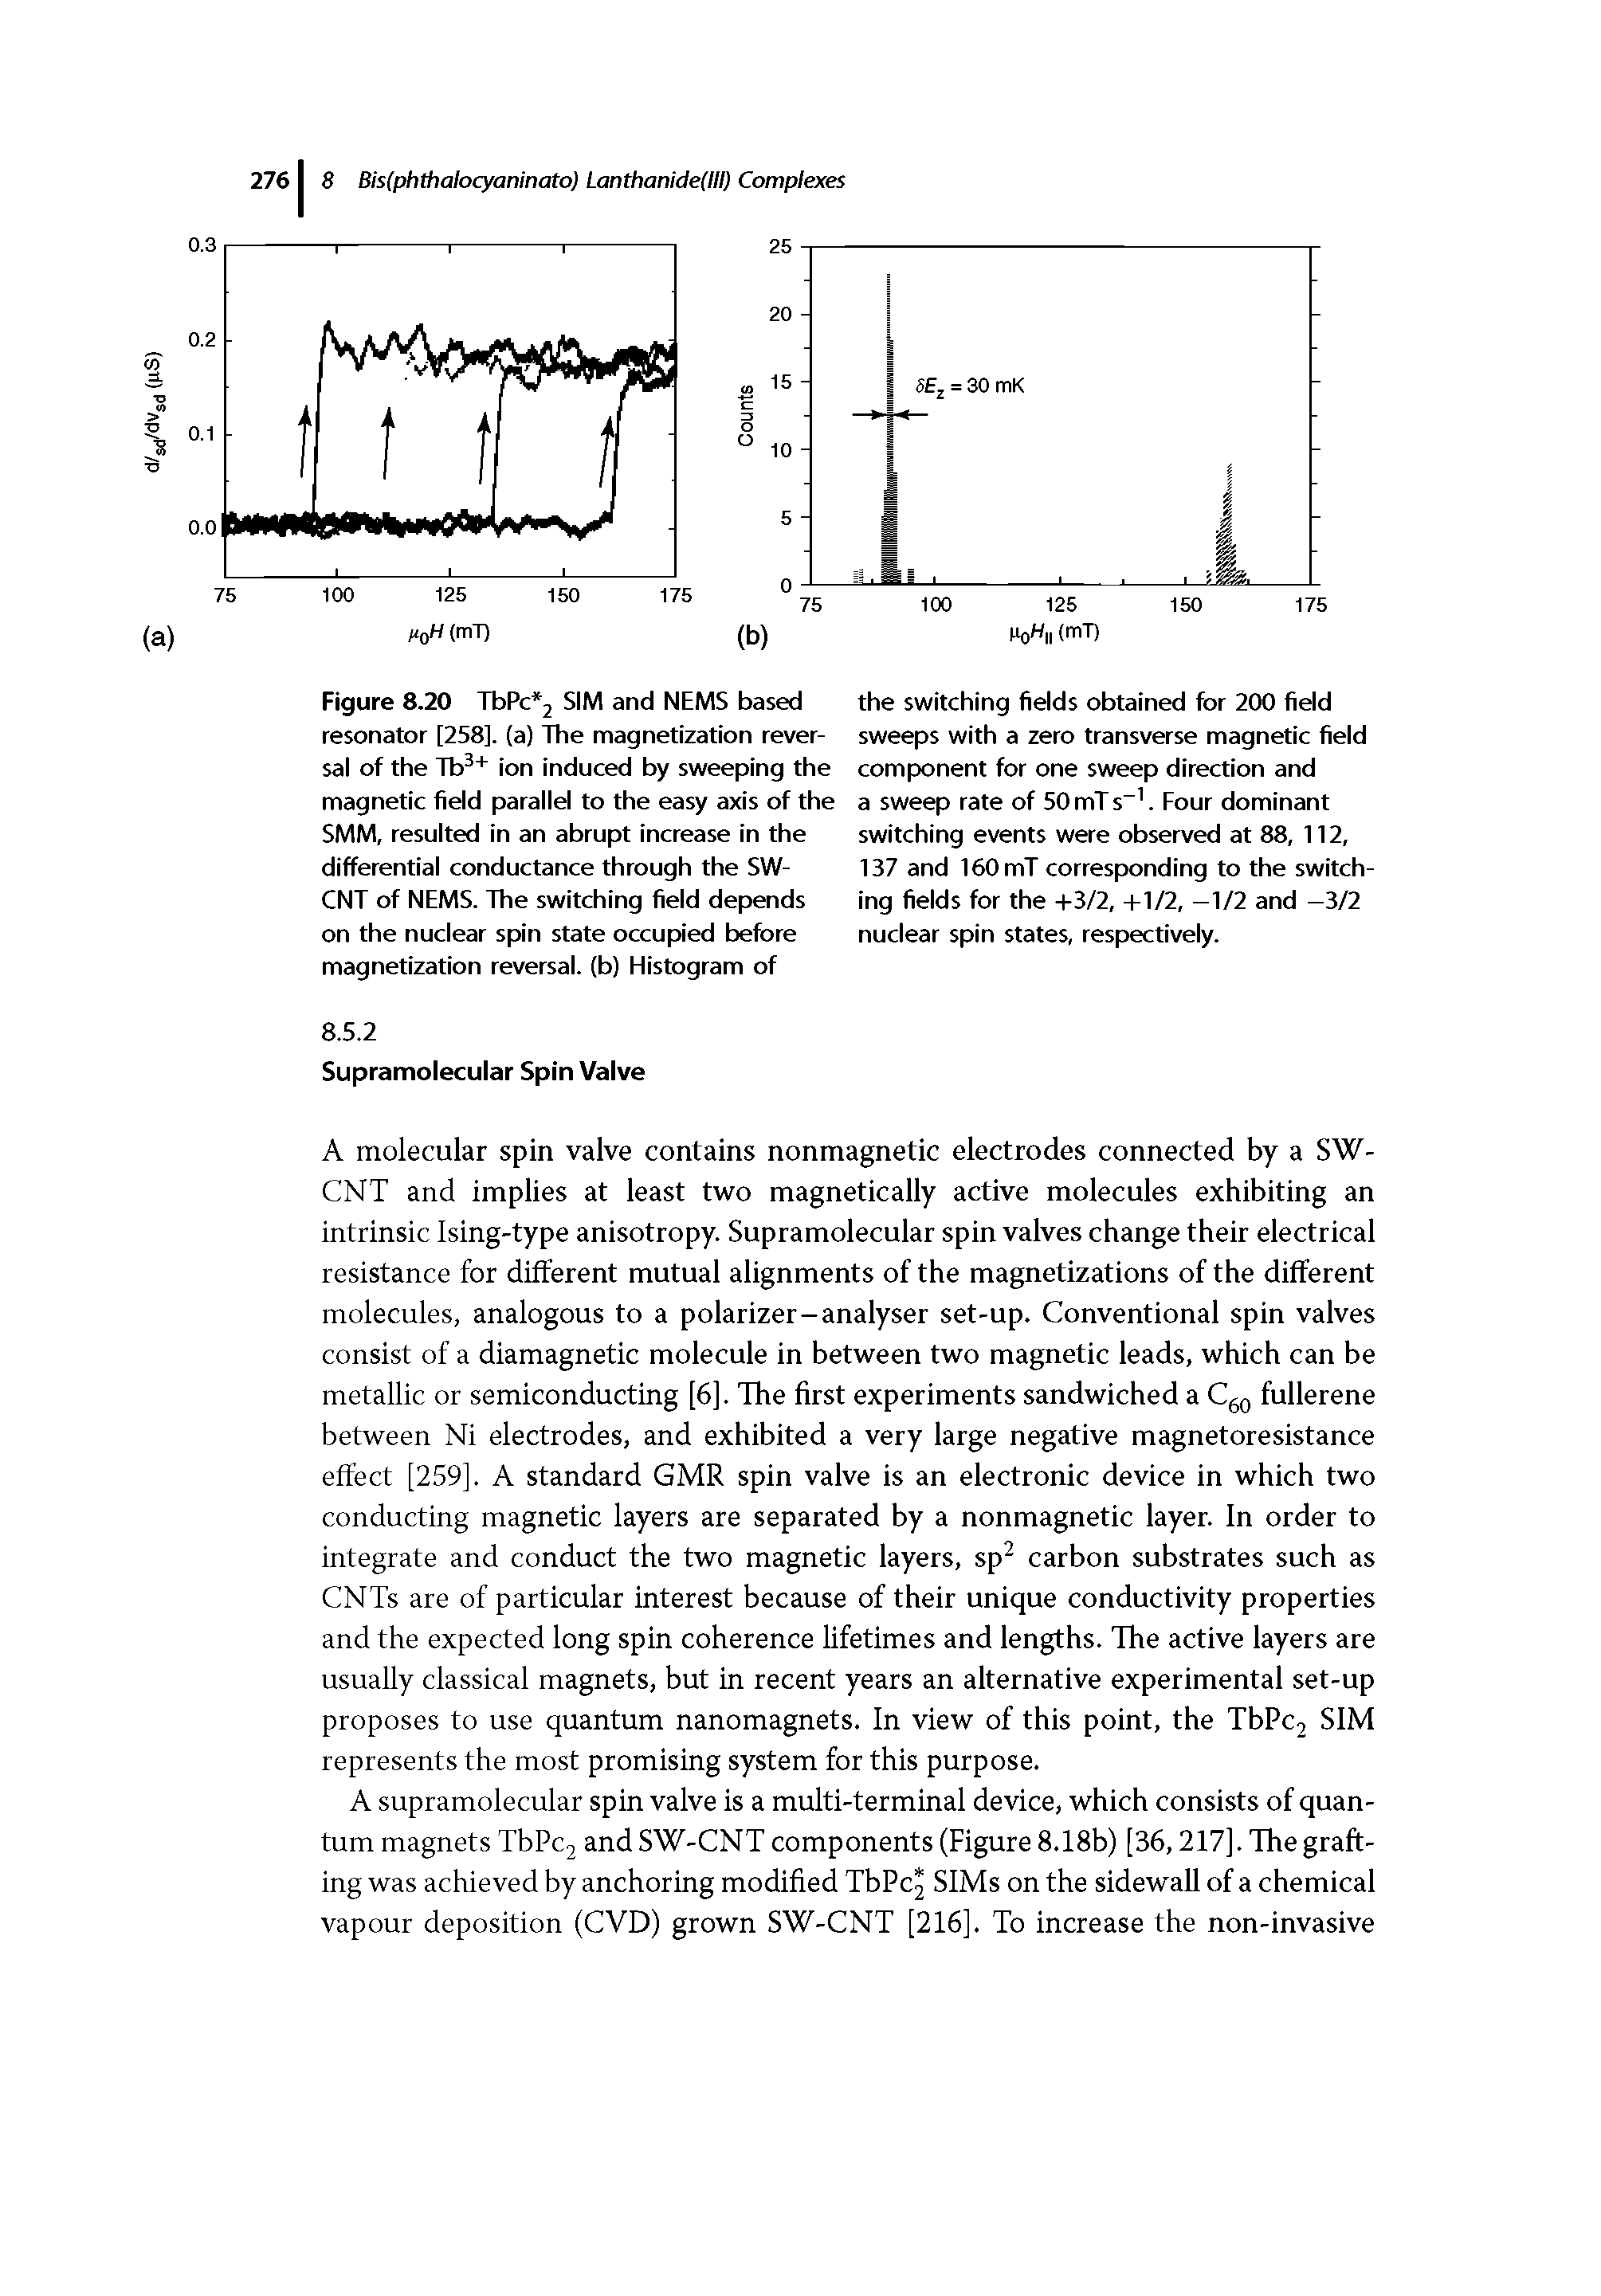 Figure 8.20 TbPc 2 SIM and NEMS based resonator [258]. (a) The magnetization reversal of the Tb3+ ion induced by sweeping the magnetic field parallel to the easy axis of the SMM, resulted in an abrupt increase in the differential conductance through the SW-CNT of NEMS. The switching field depends on the nuclear spin state occupied before magnetization reversal, (b) Elistogram of...